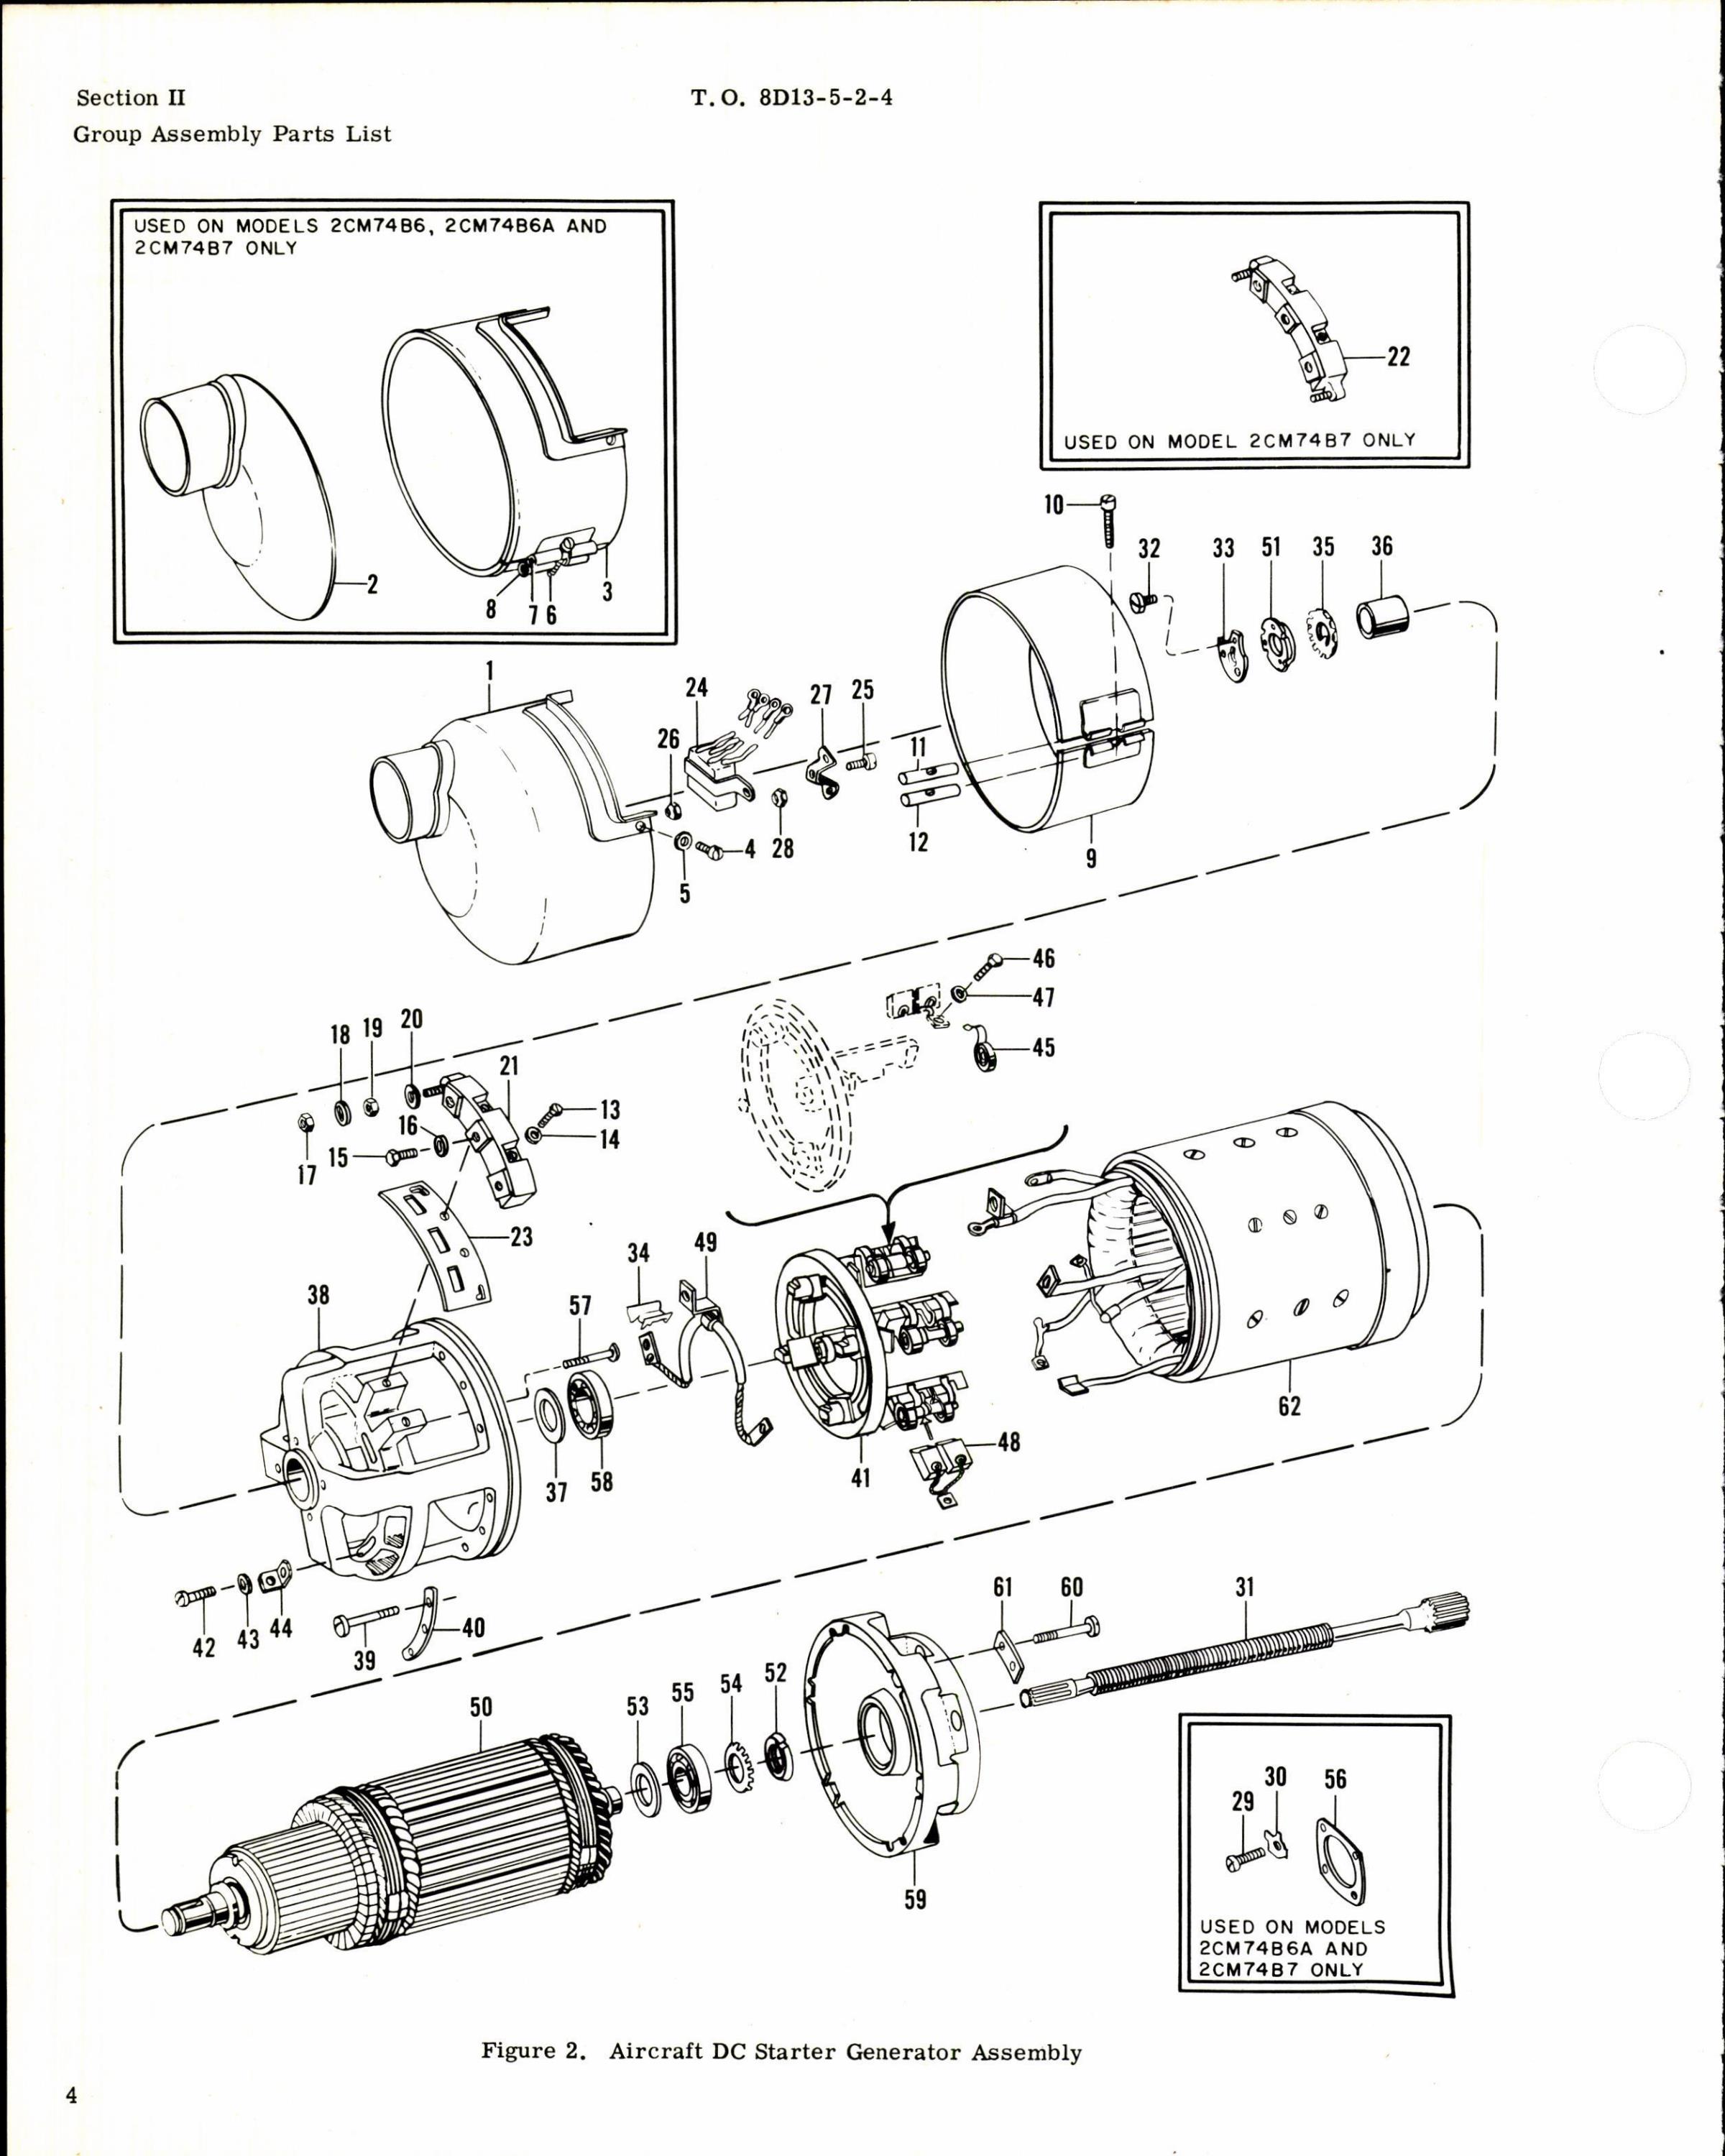 Sample page 4 from AirCorps Library document: Illustrated Parts Breakdown for Aircraft DC Starter Generator